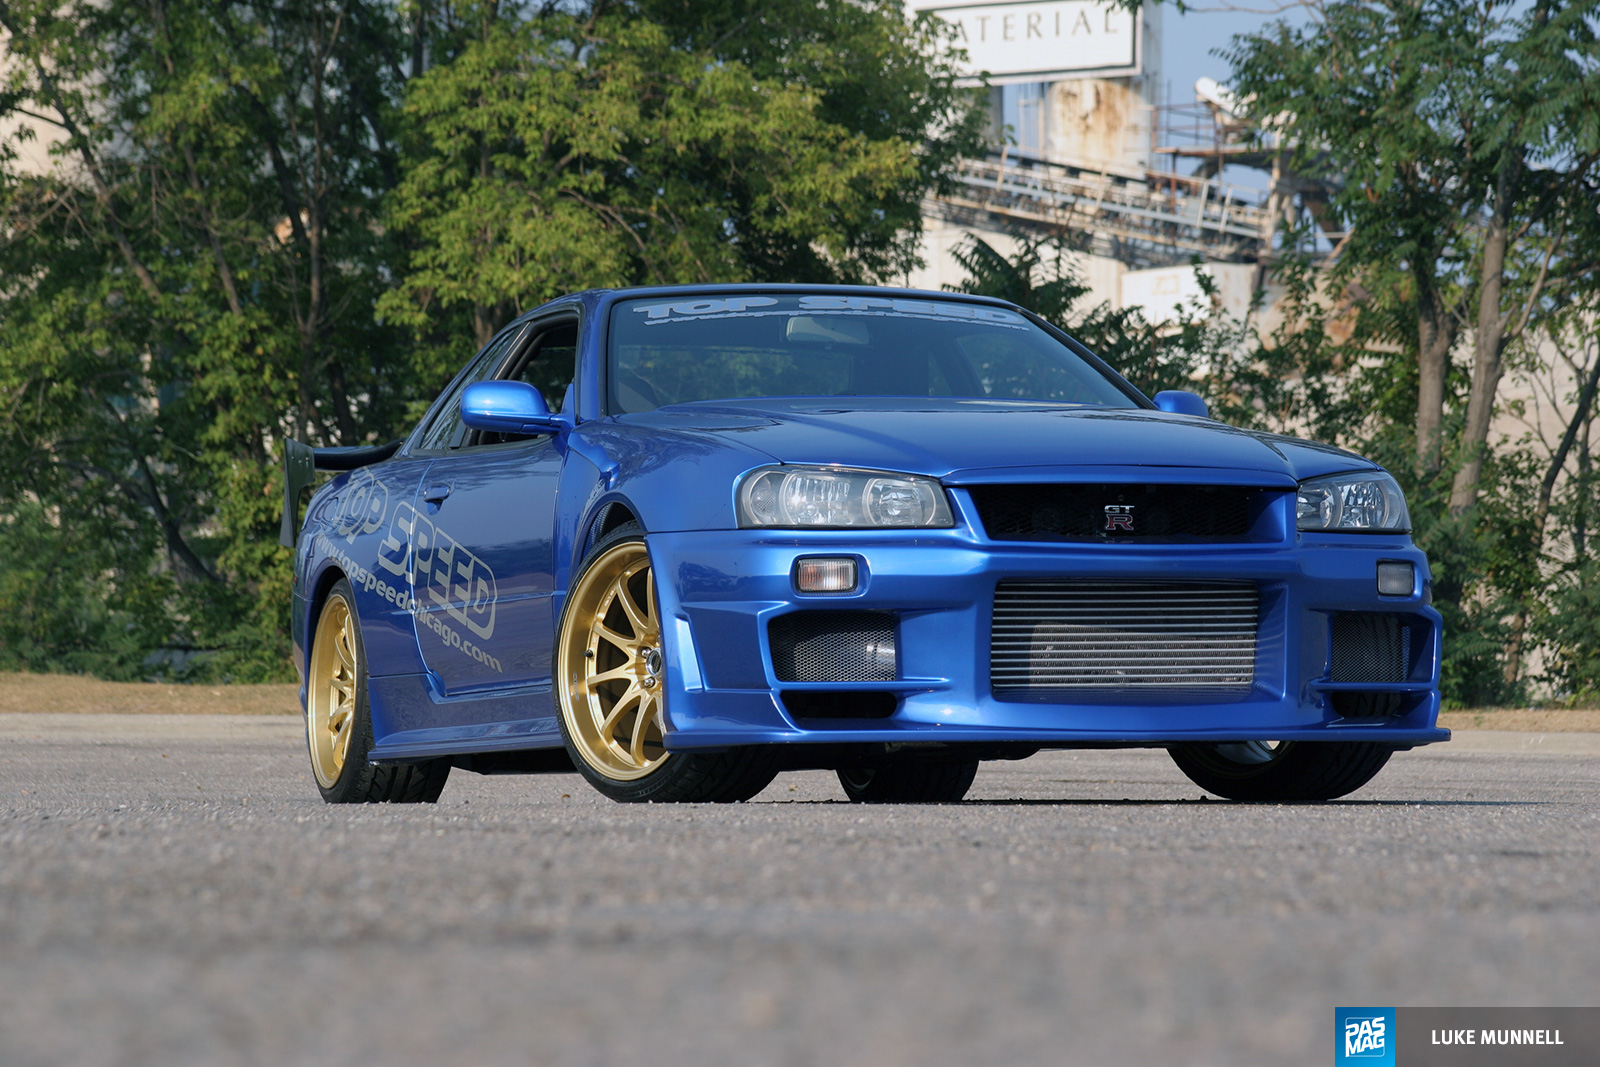 The Perfect Weapon: Joey Feng's 1999 Nissan Skyline GT-R R34